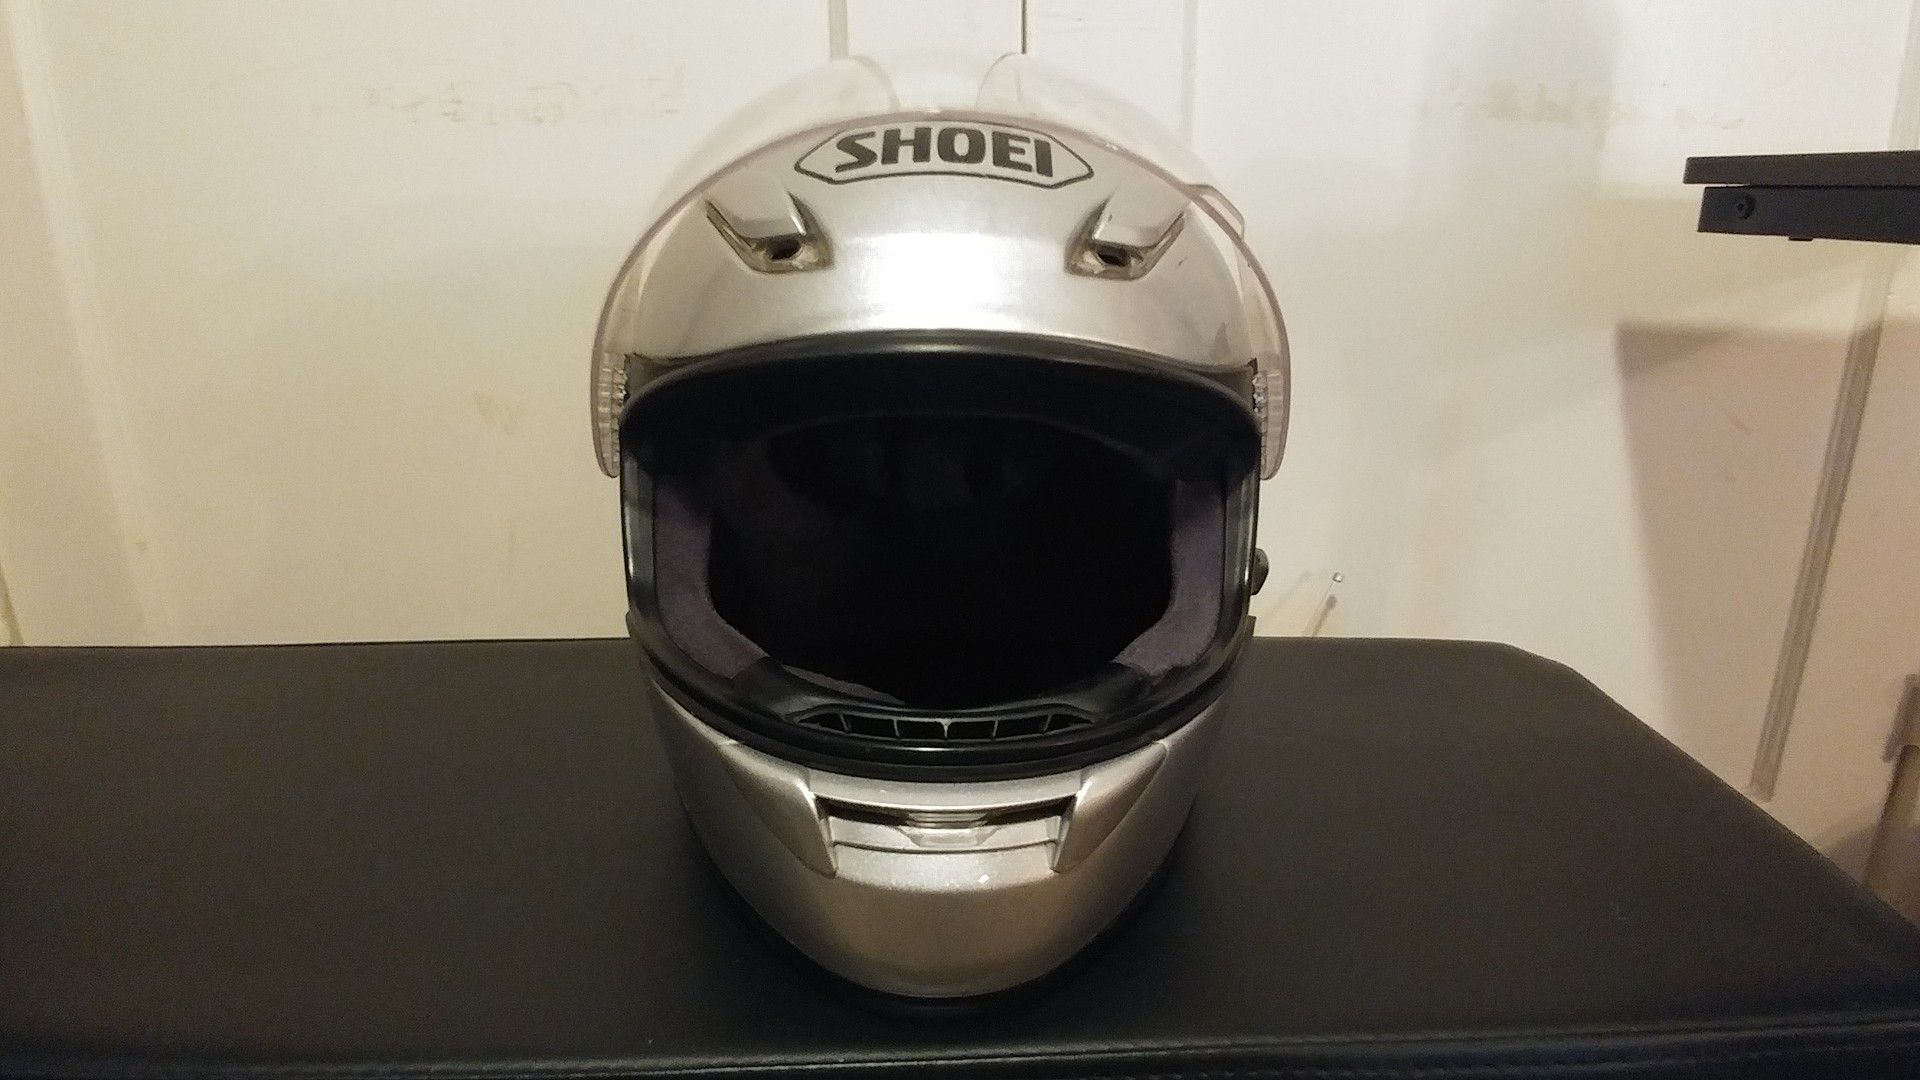 SHOEI Motorcycle Helmet, Full Face - Gray, Used, Few nicks and scratches - Medium